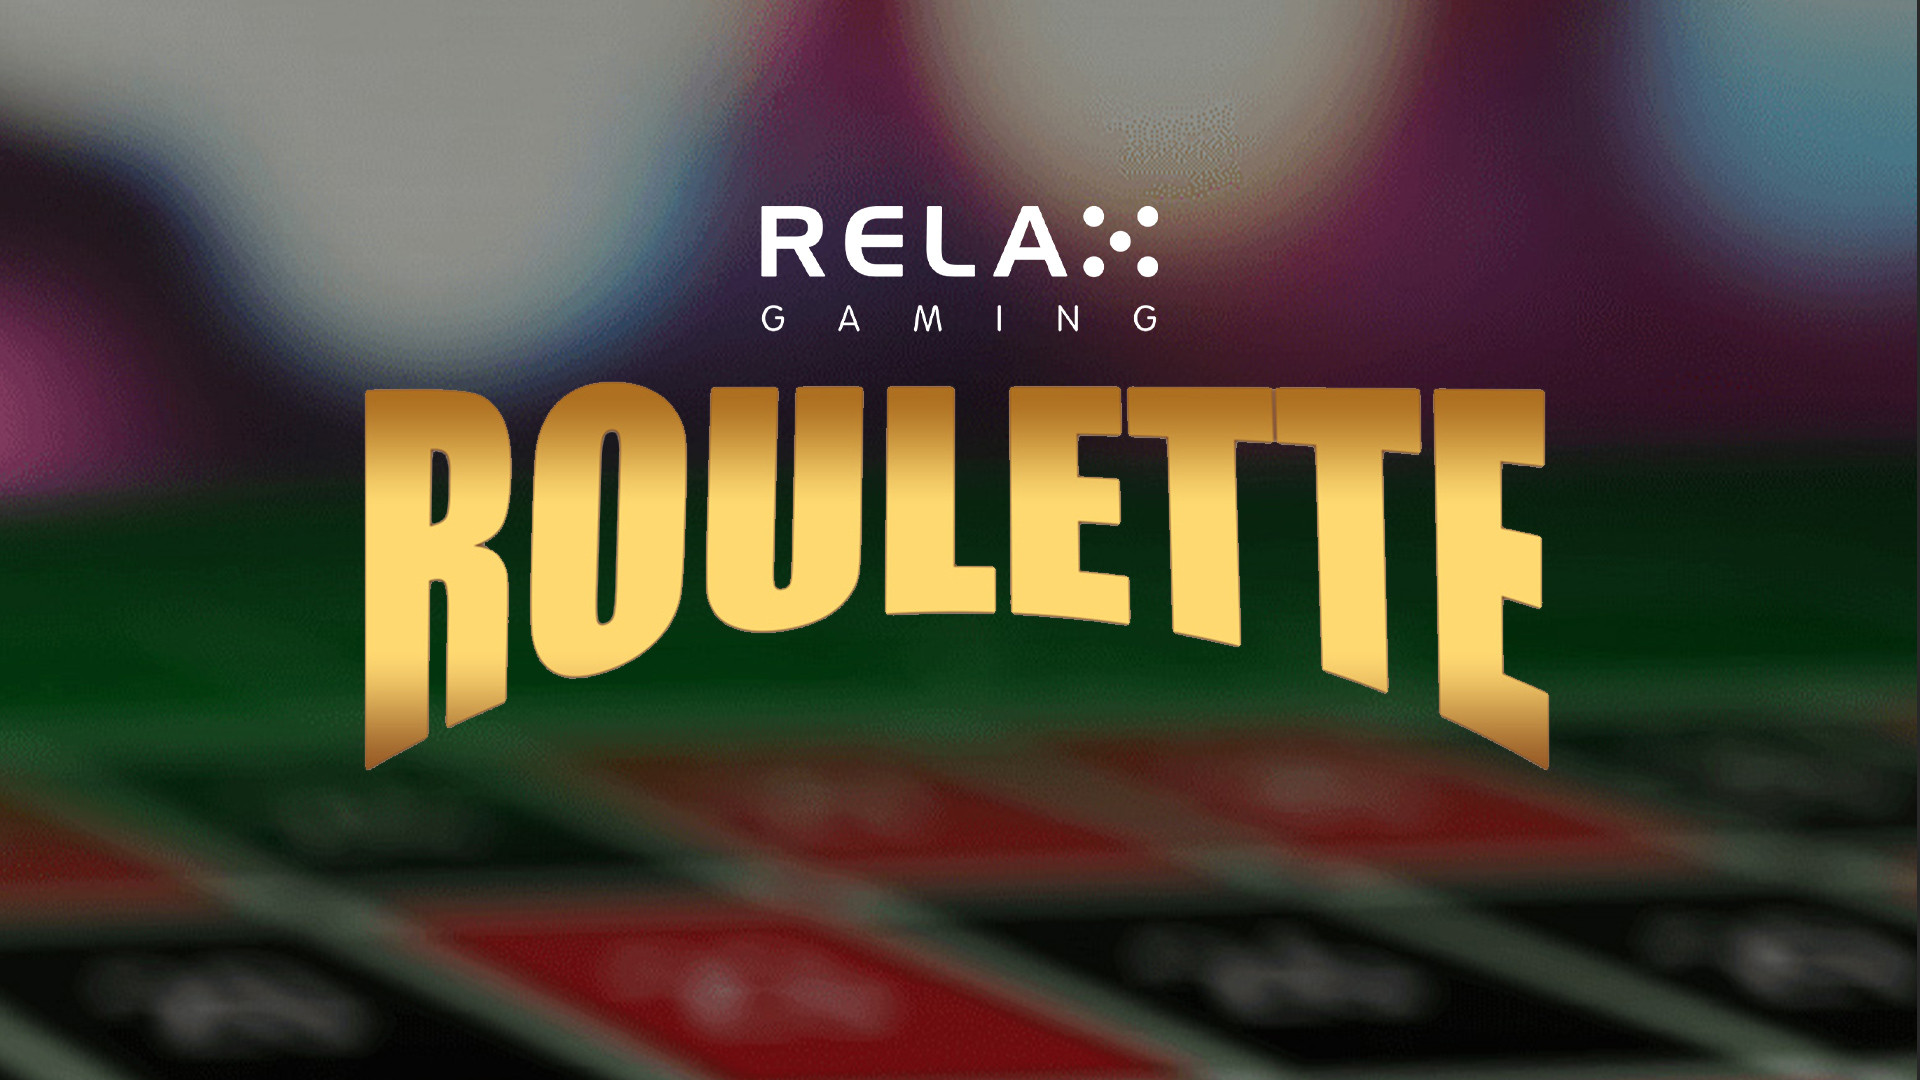 Relax - Roulette